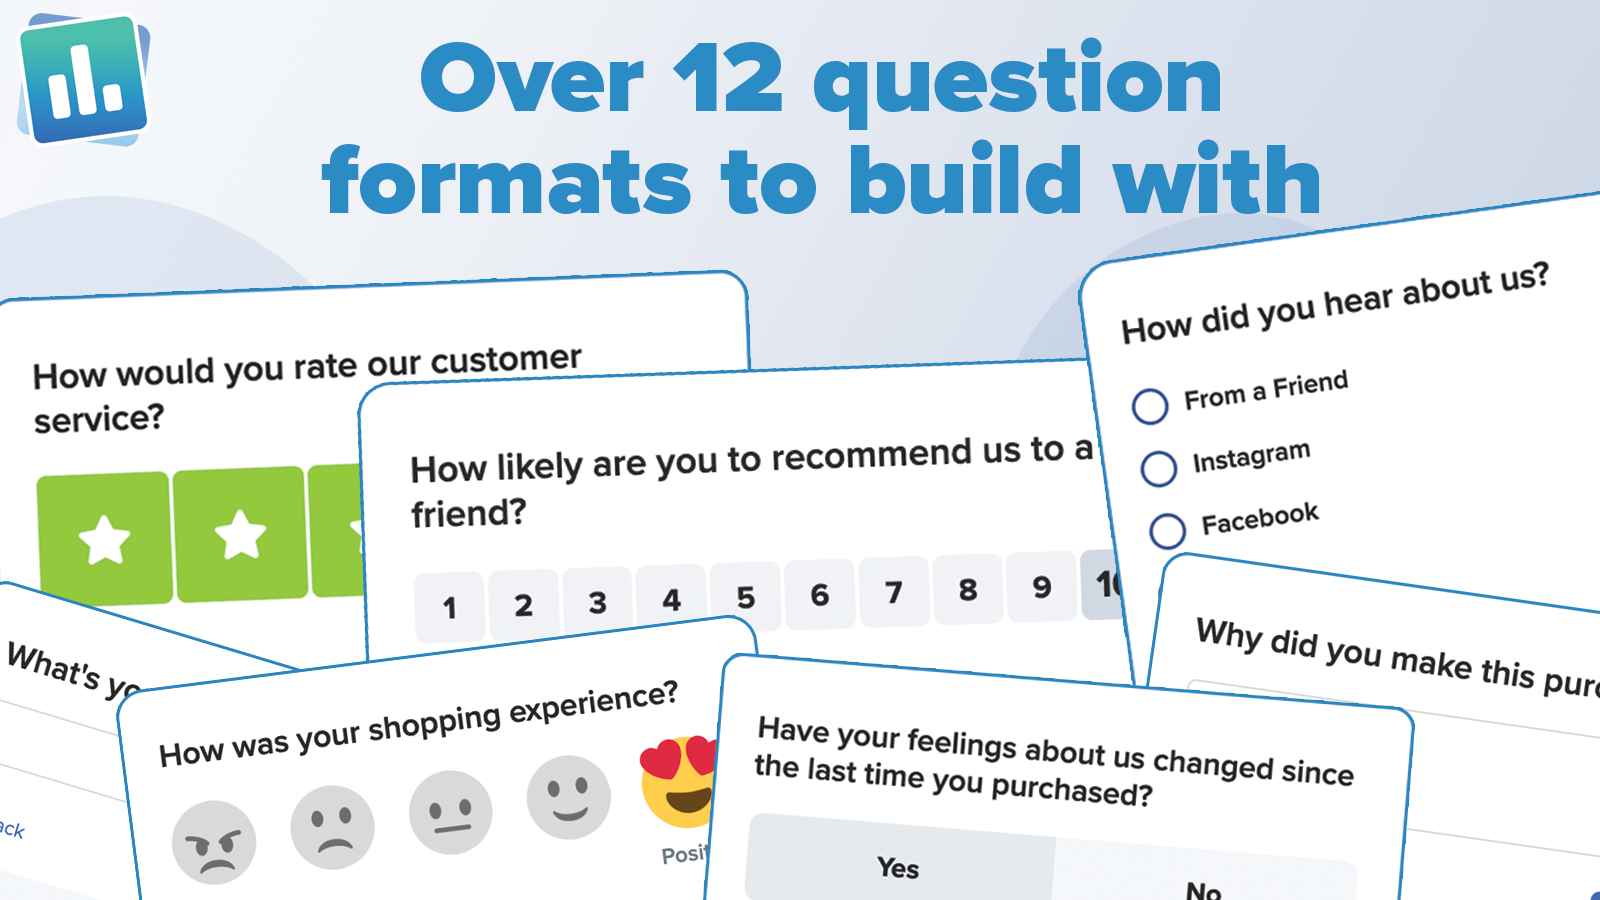 Over 12 question formats to build with